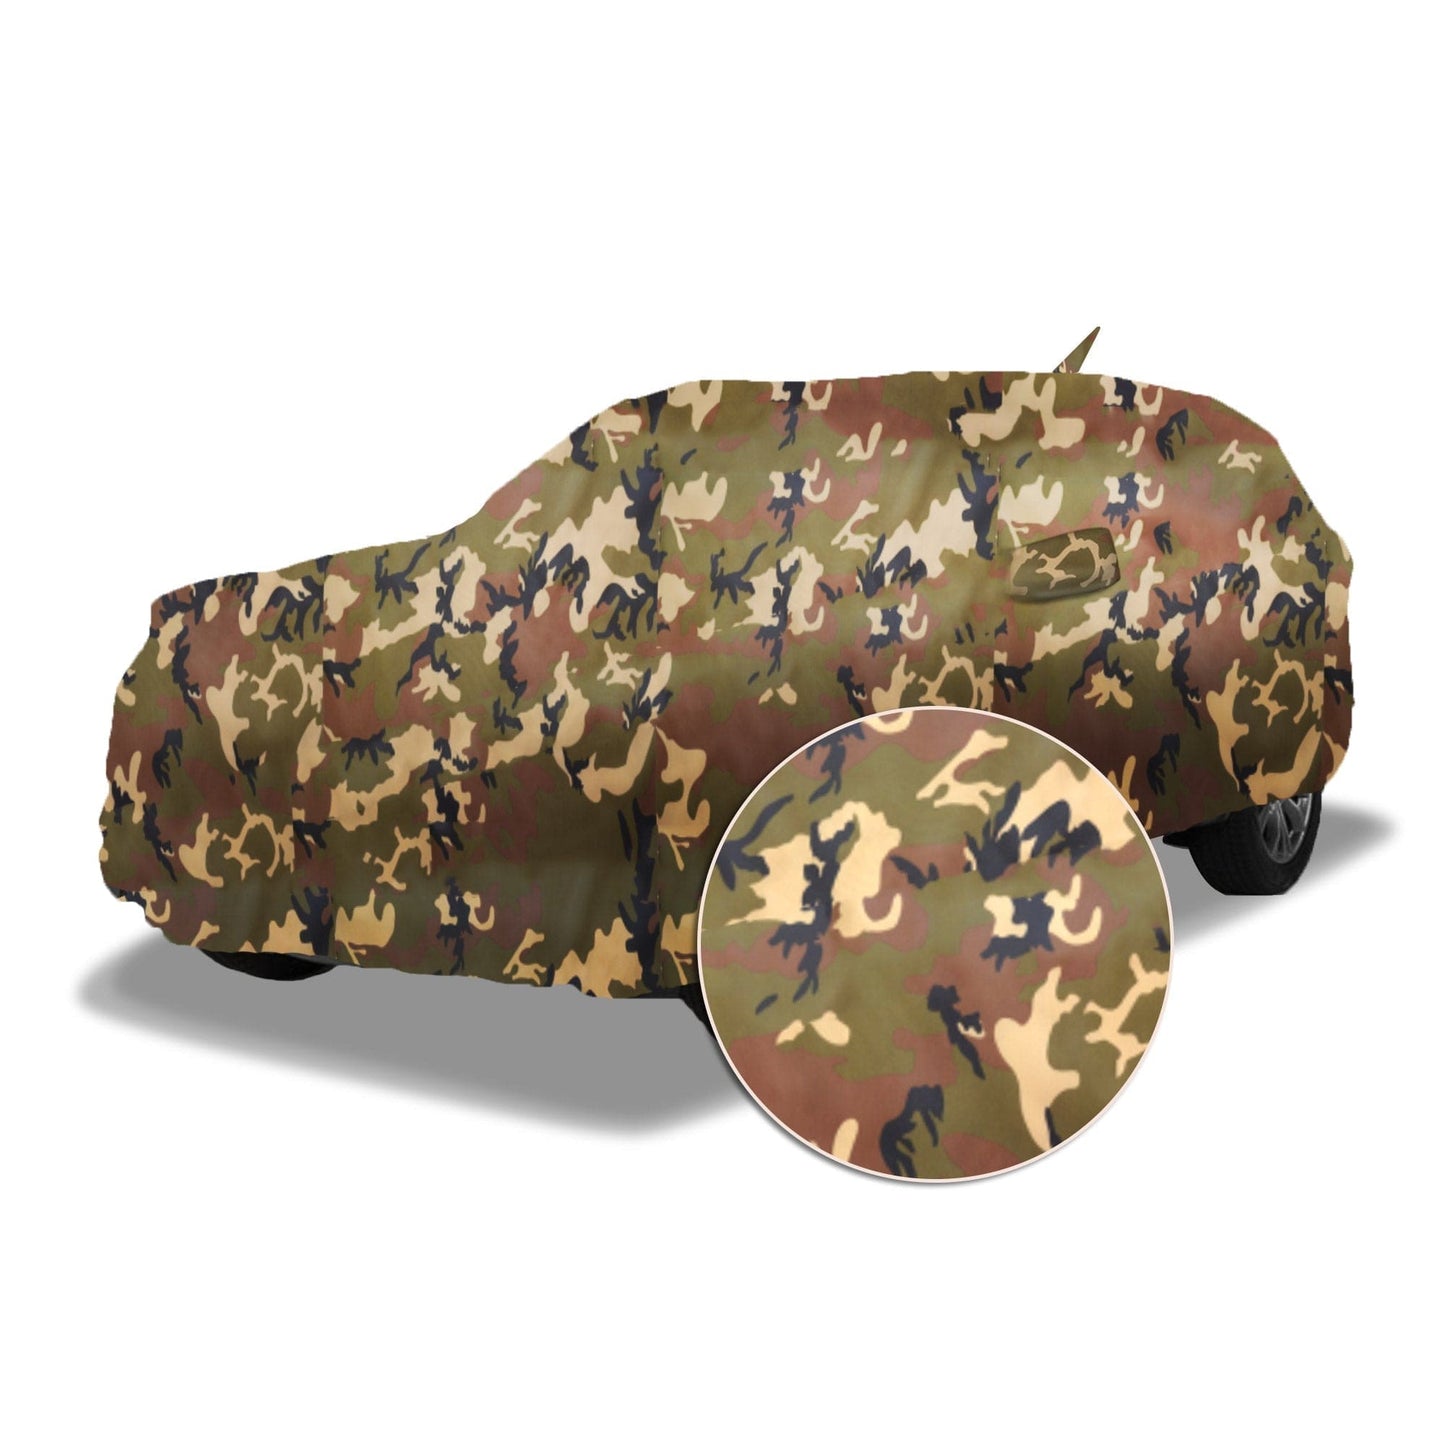 Ascot Maruti Suzuki Alto Car Body Cover 2021-2023 Model Extra Strong & Dust Proof Jungle Military Car Cover with UV Proof & Water-Resistant Coating